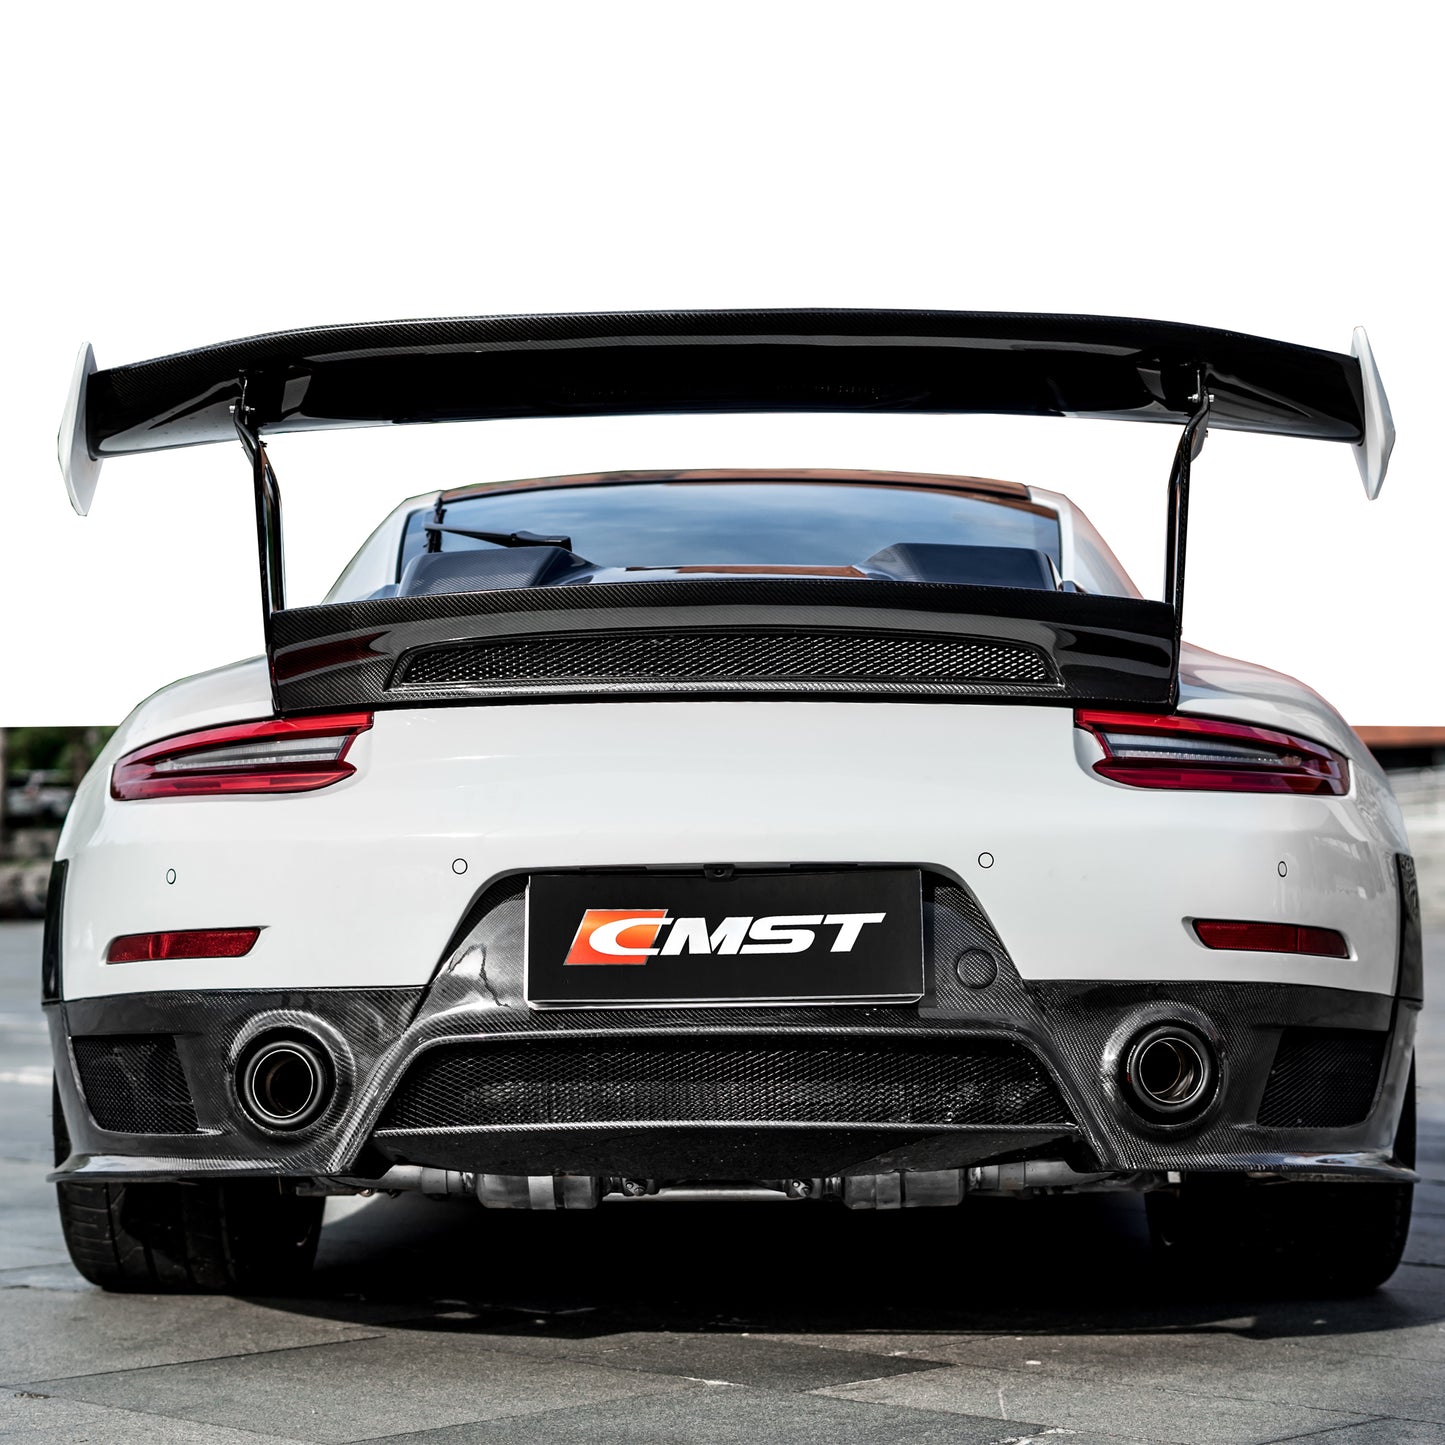 Body kit for Porsches 911 upgrades to 911 GT2 RS